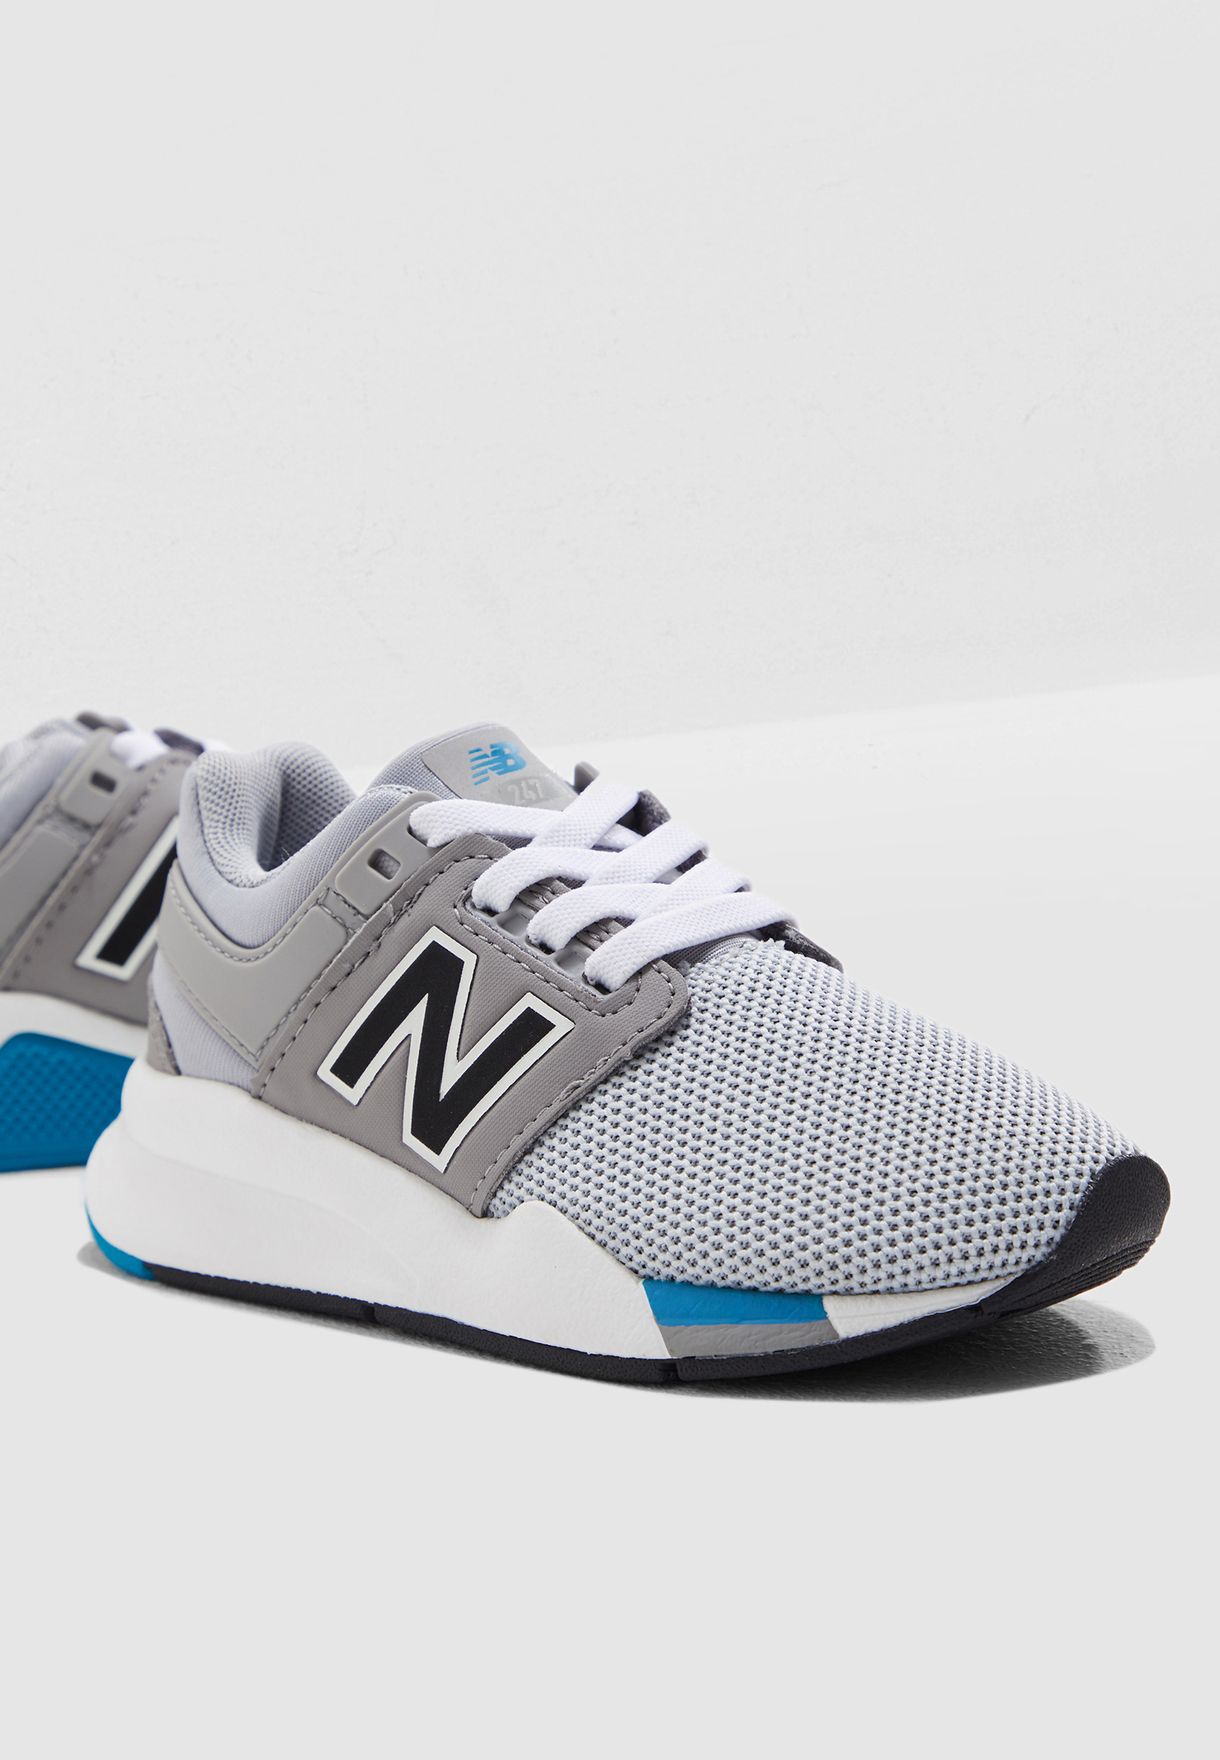 New Balance 274 Blue Online Shop, UP TO 63% OFF